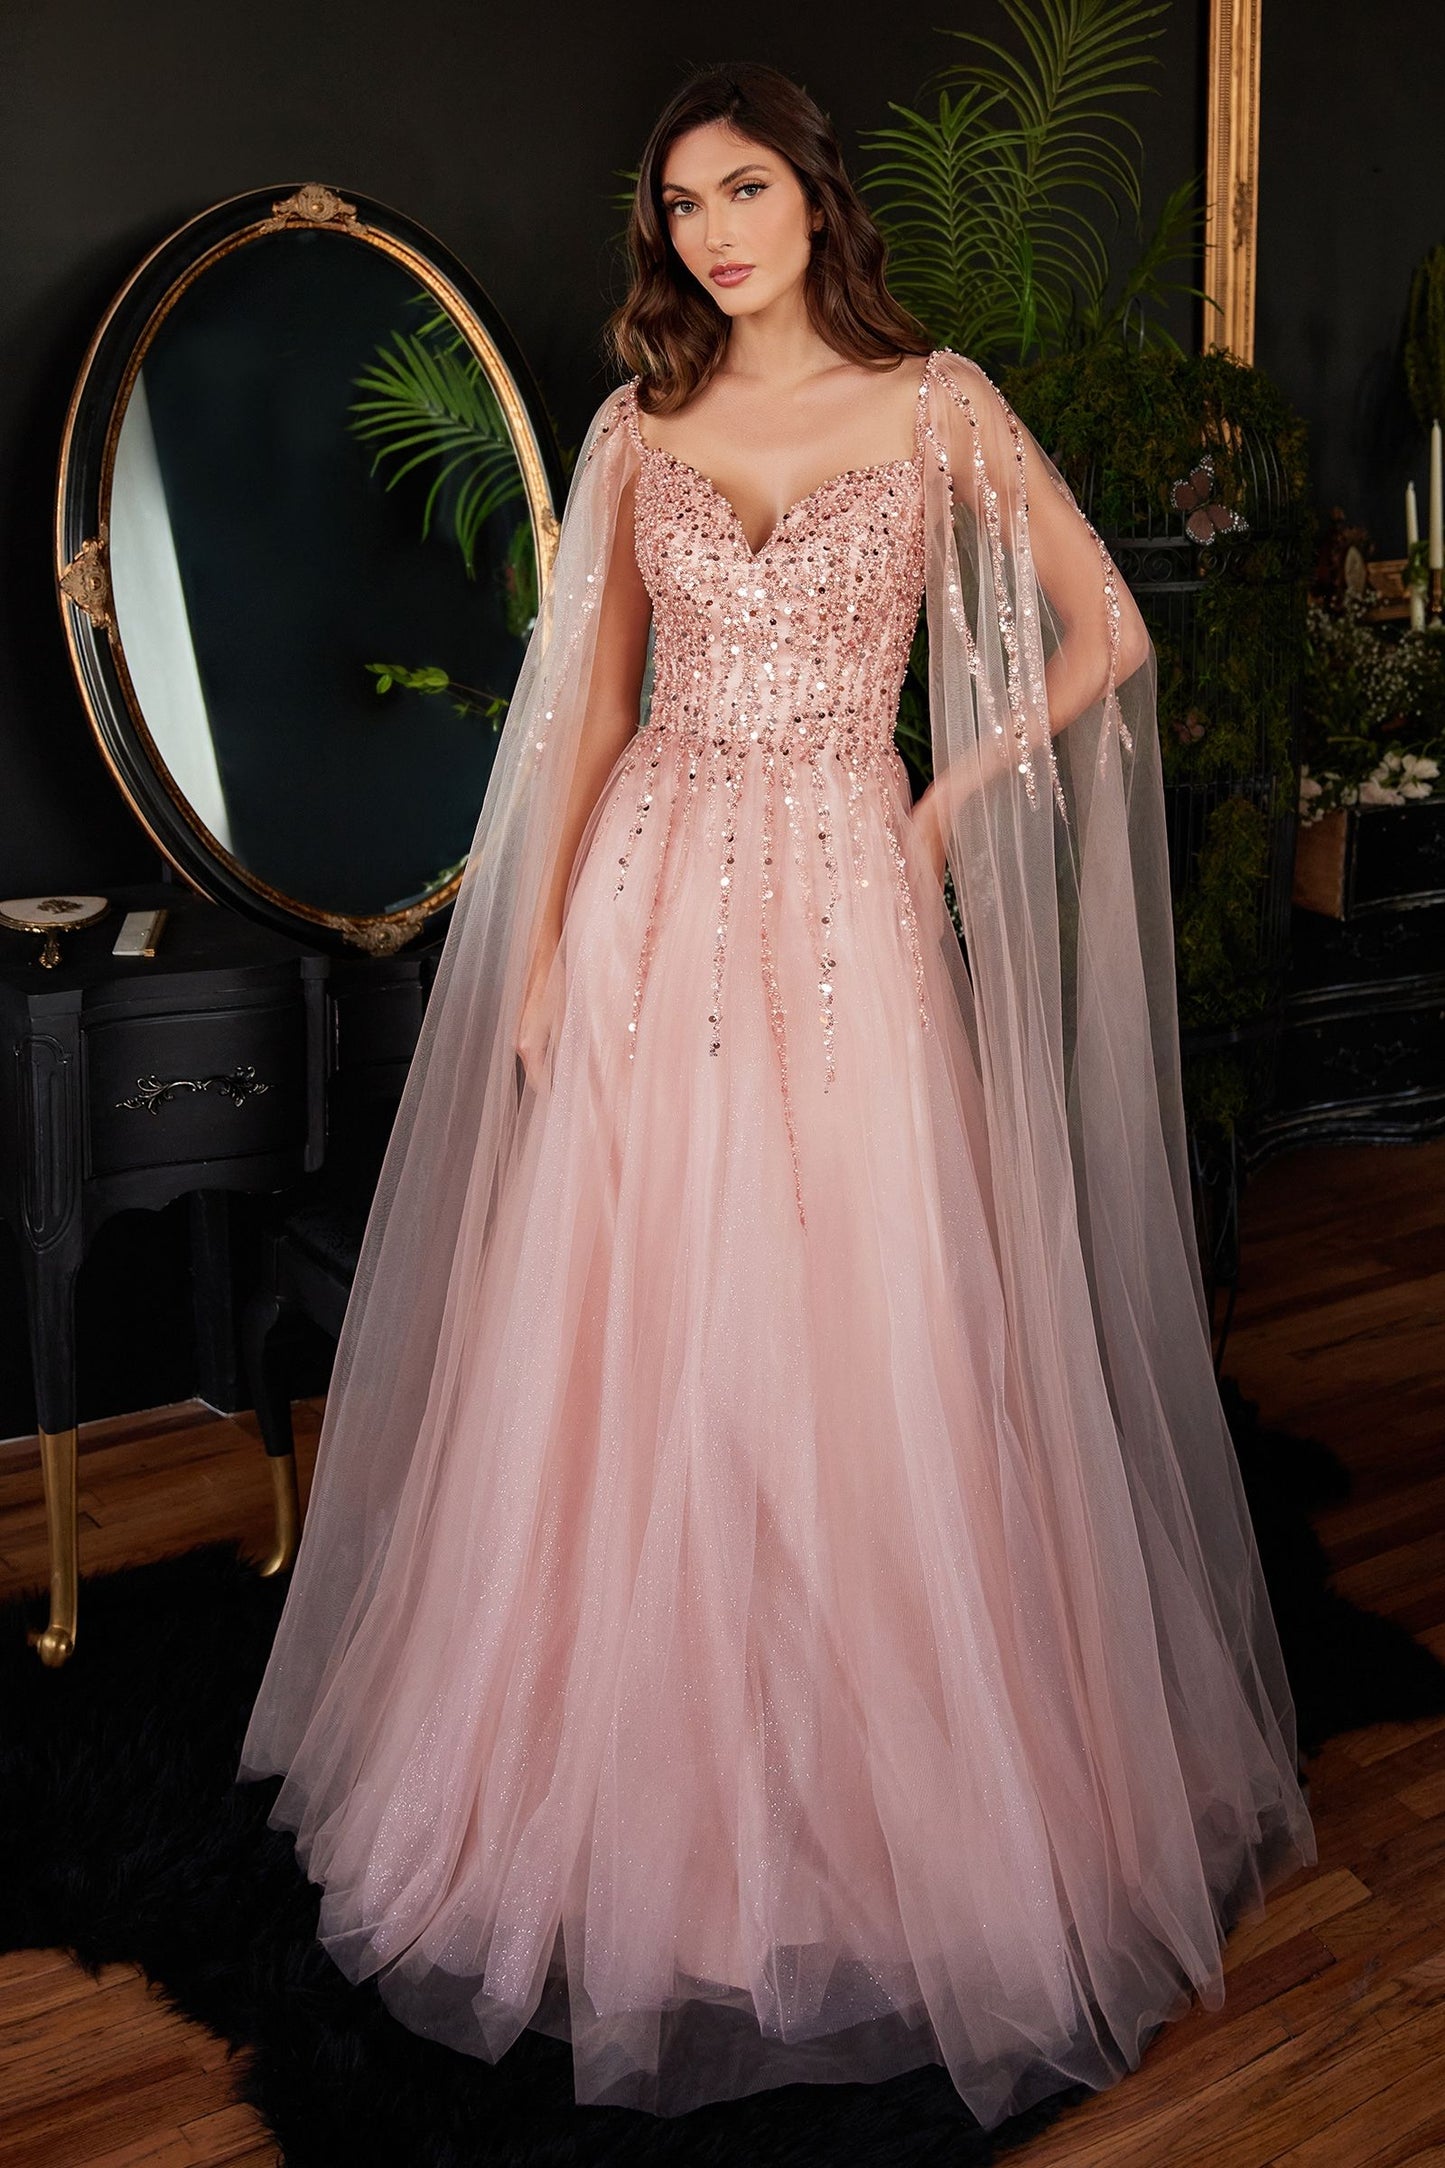 Blush pink elegant gown with a flattering V-neckline and a beautifully draped skirt.